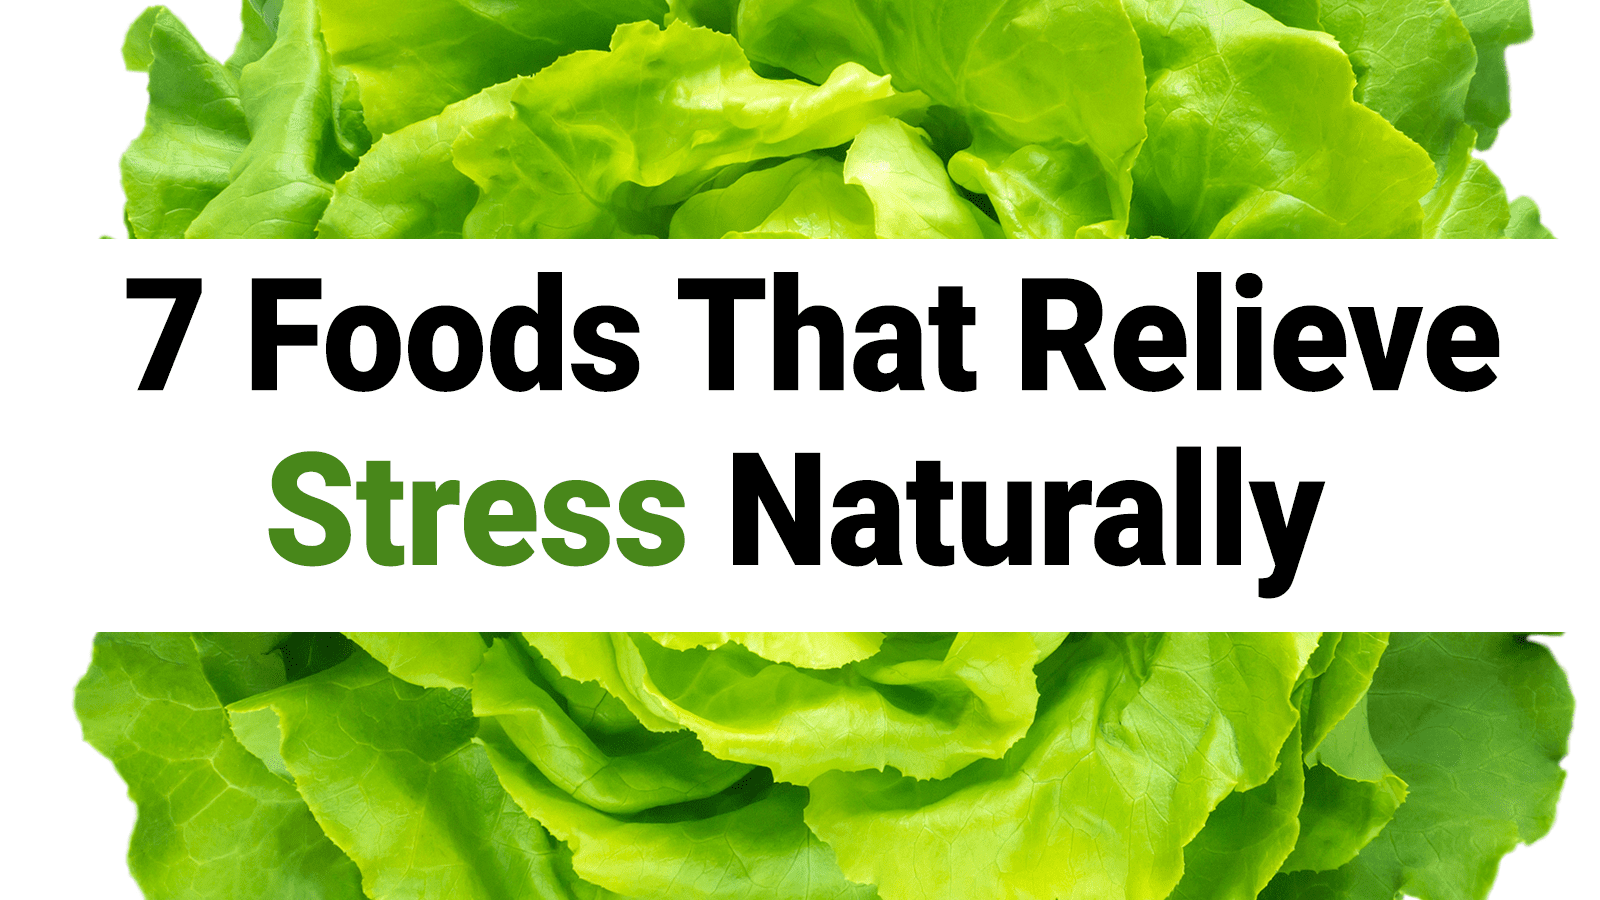 7 Foods That Relieve Stress Naturally